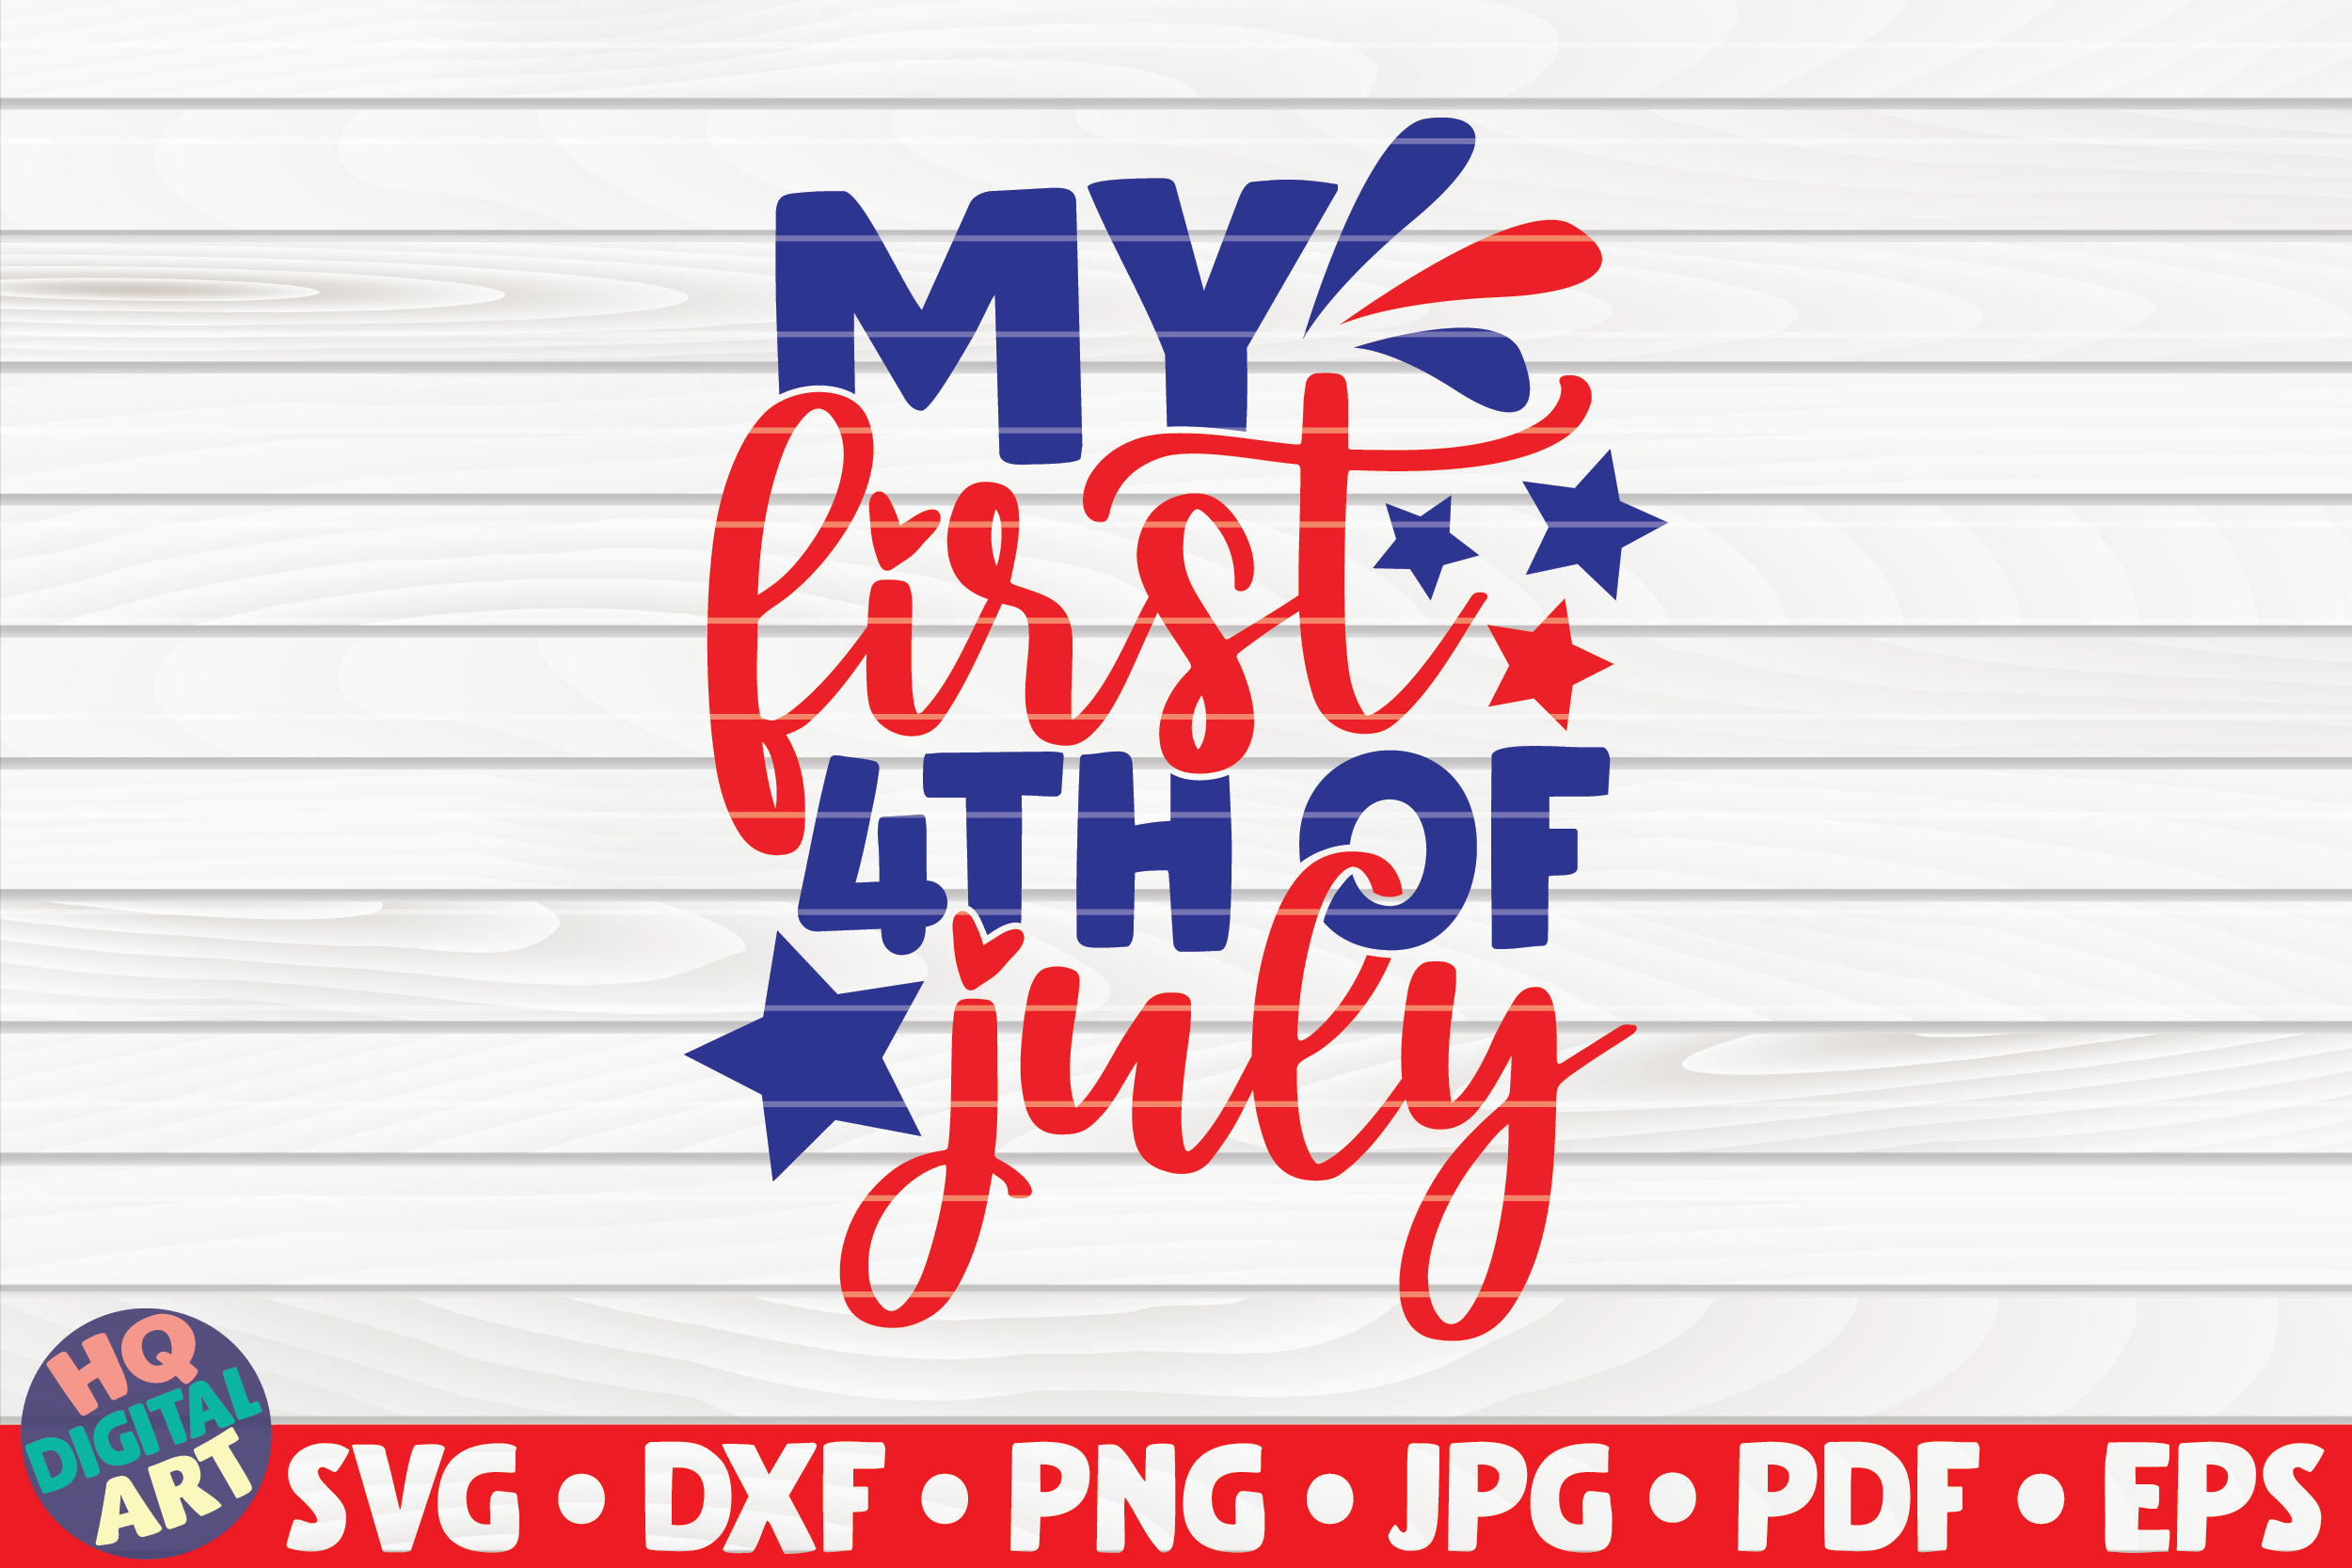 My first 4th of July SVG | 4th of July Quote By HQDigitalArt